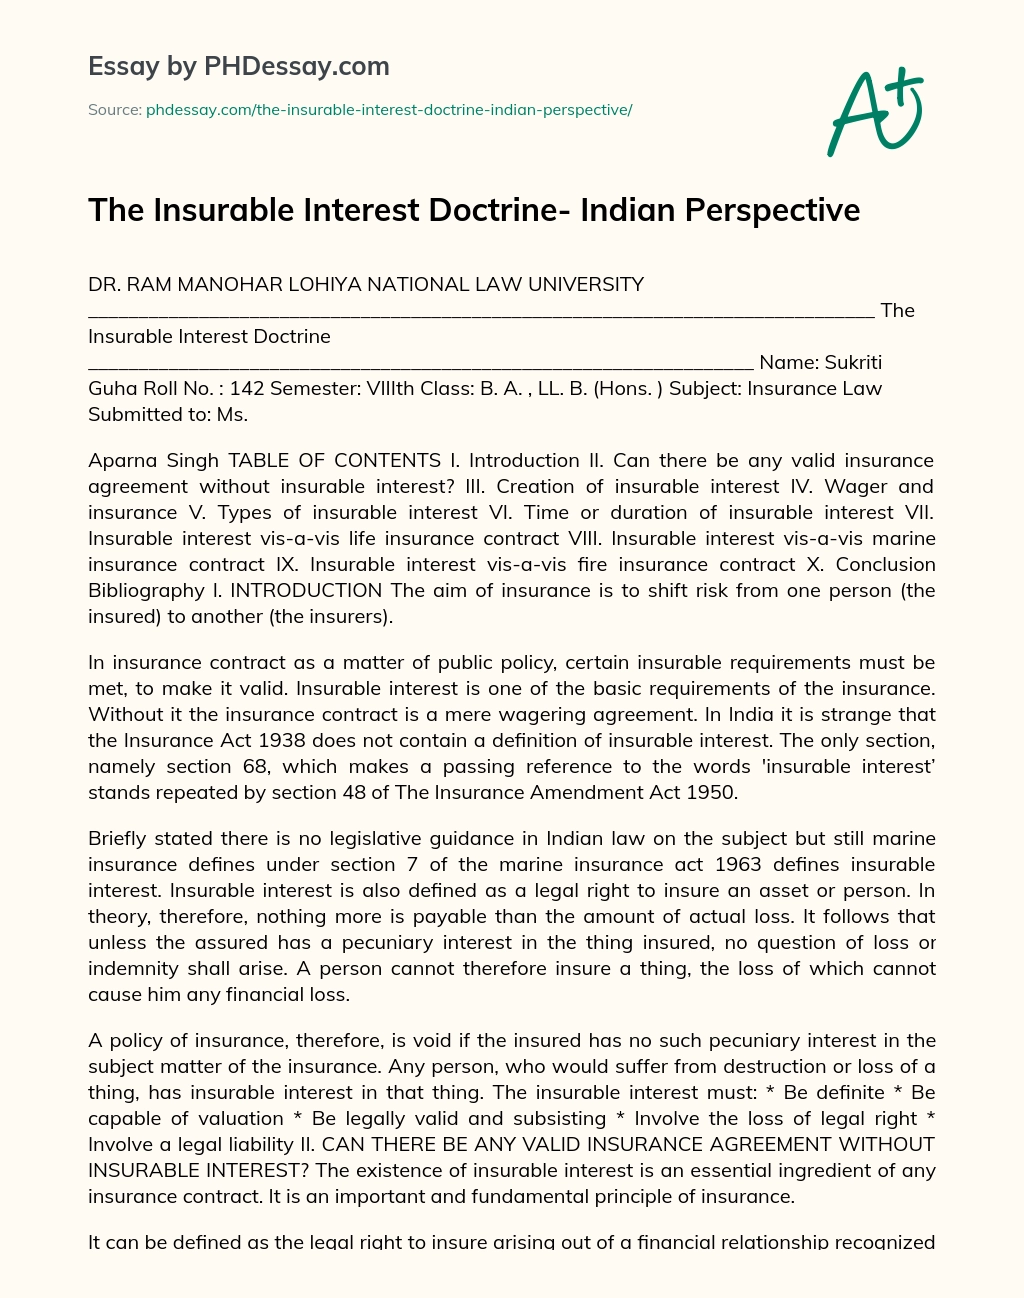 The Insurable Interest Doctrine- Indian Perspective essay